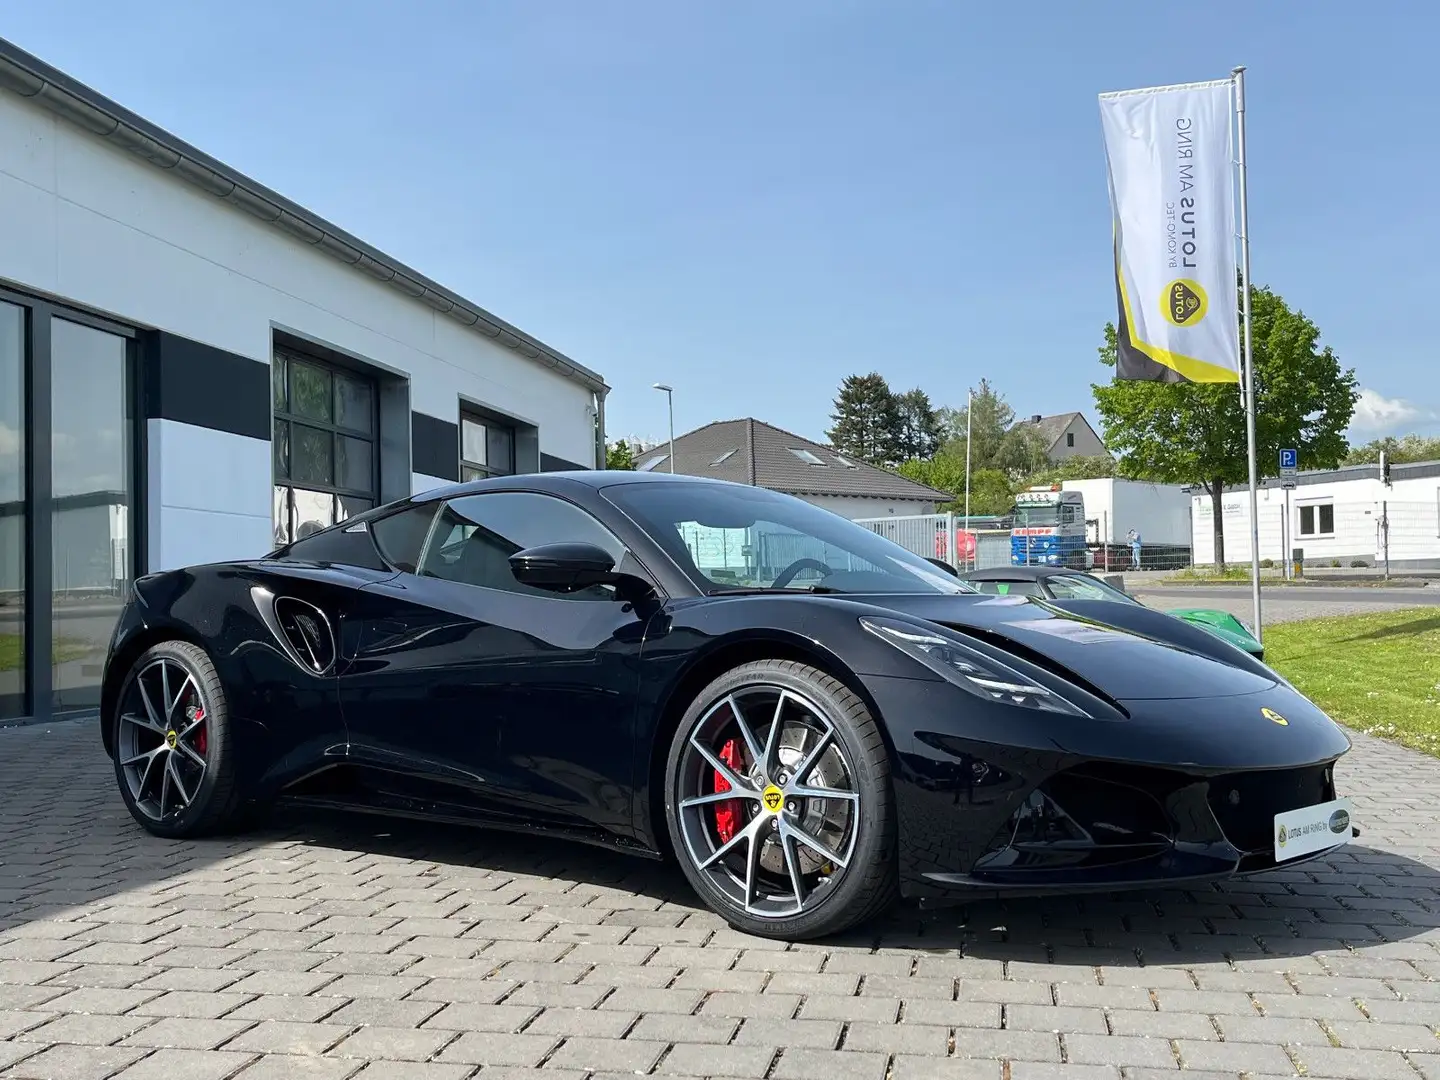 Lotus Emira I4 DCT "First Edition" by Lotus am Ring Czarny - 1